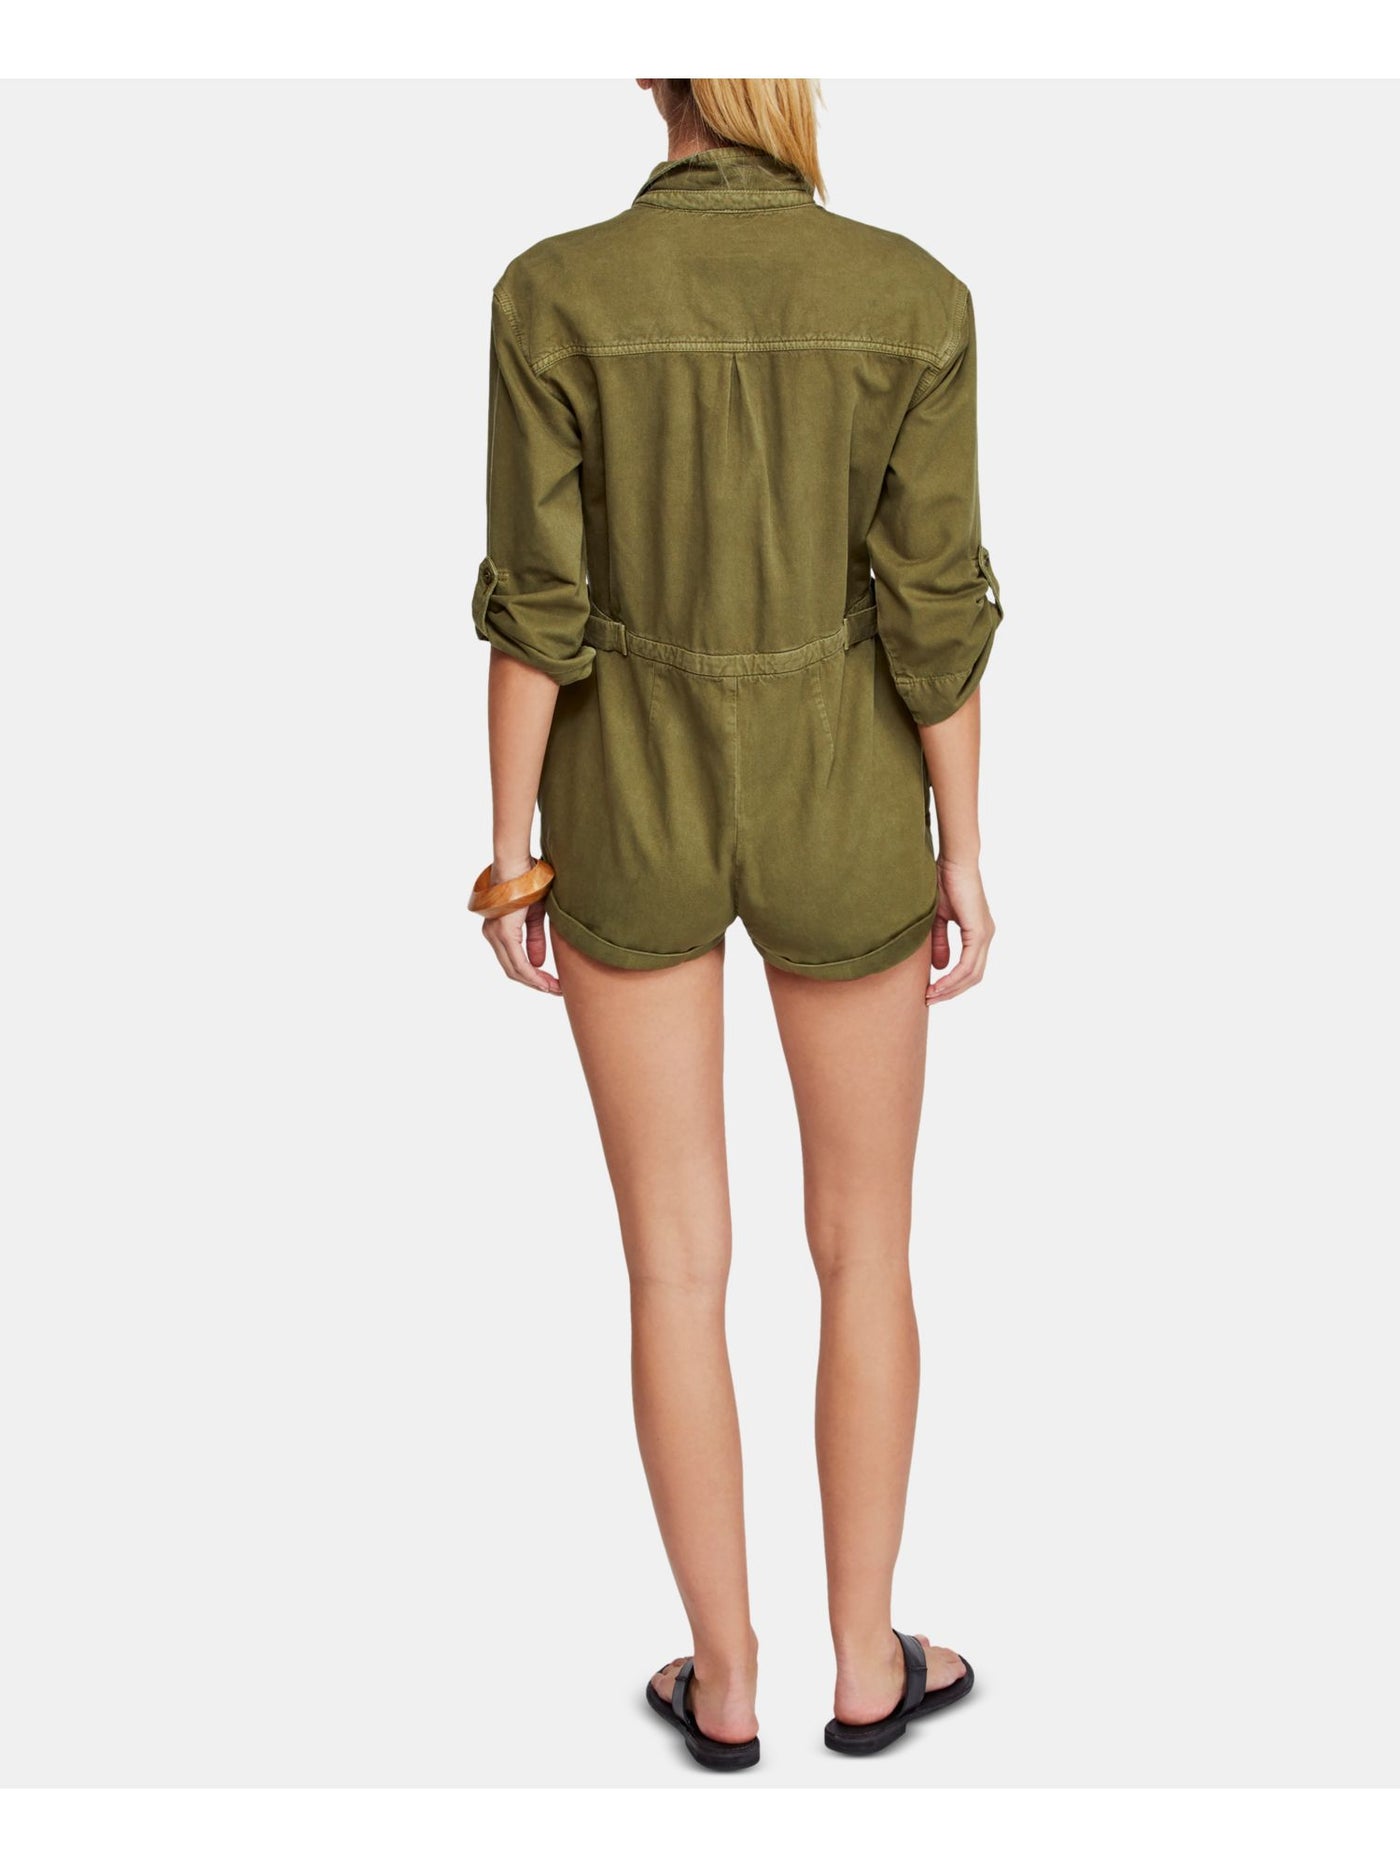 FREE PEOPLE Womens Green 3/4 Sleeve Collared Romper 4